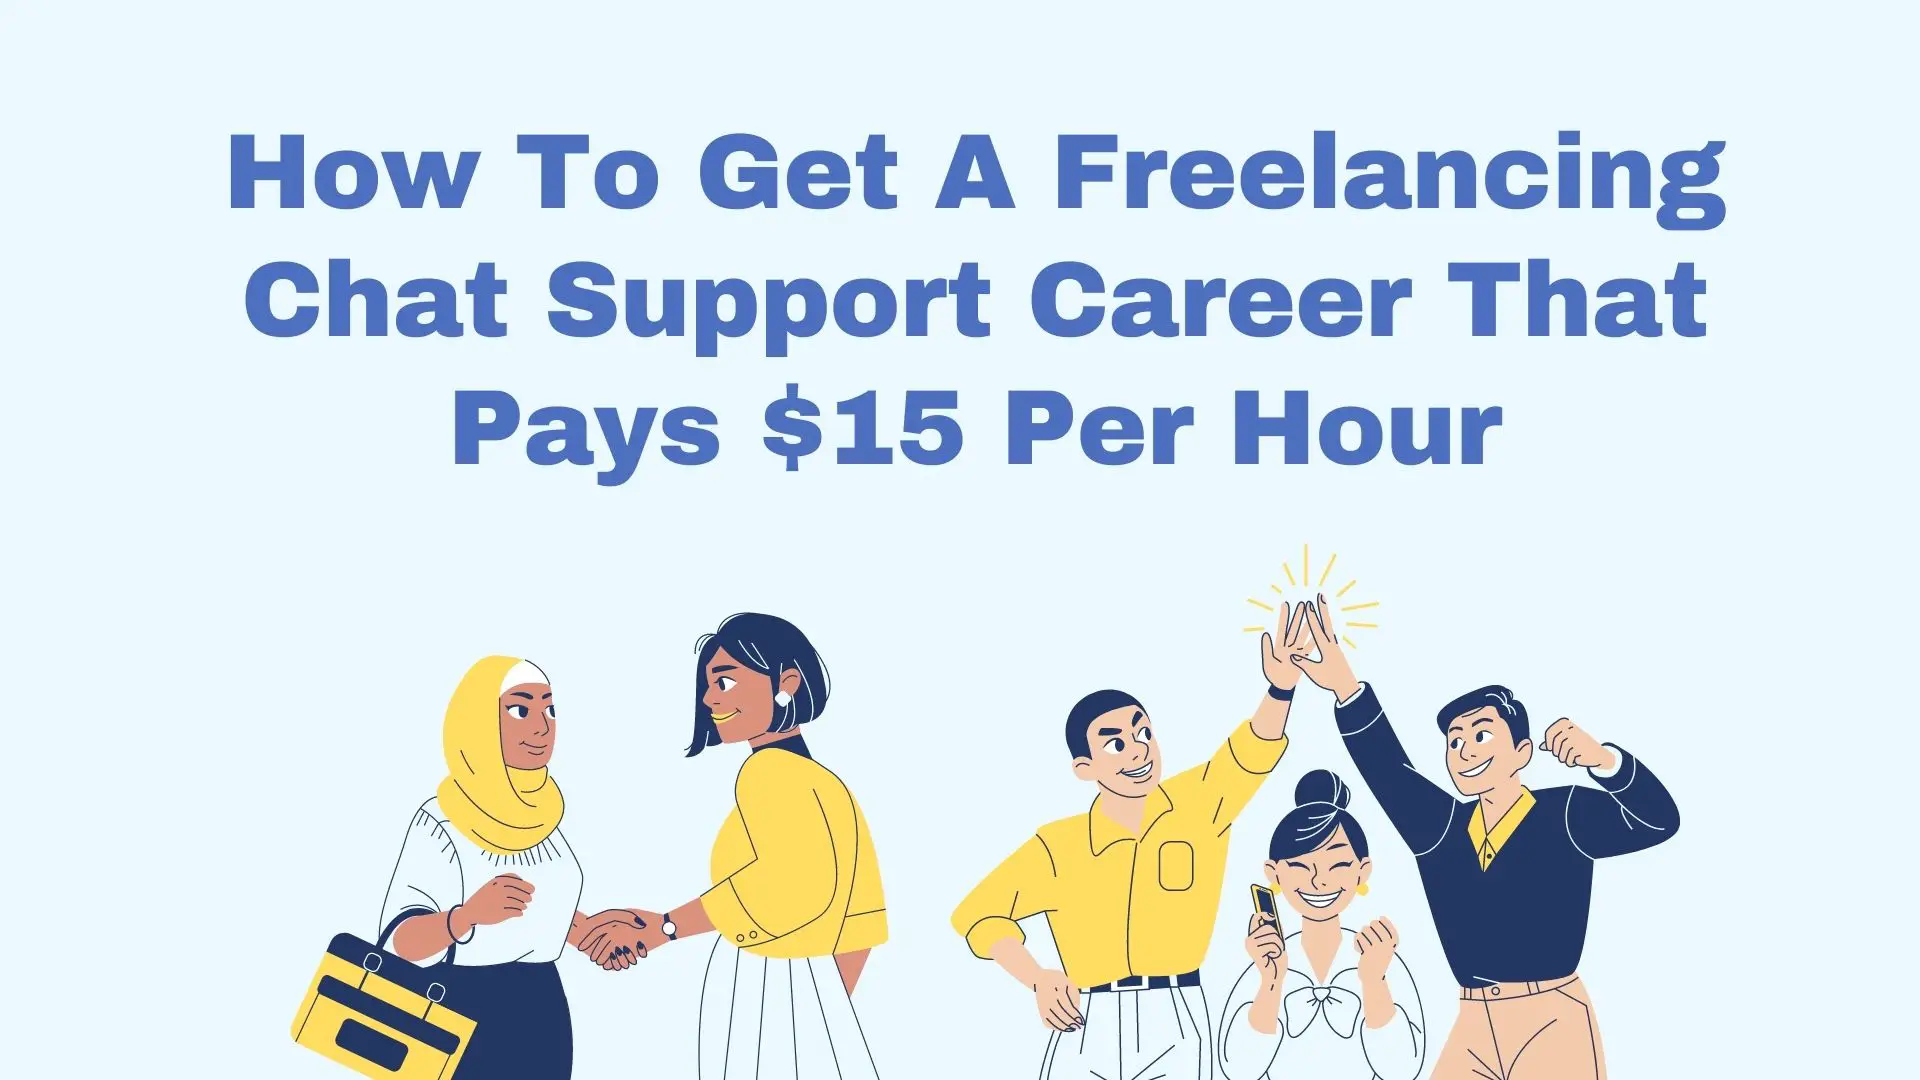 How To Get A Freelancing Chat Support Career That Pays $15 Per Hour